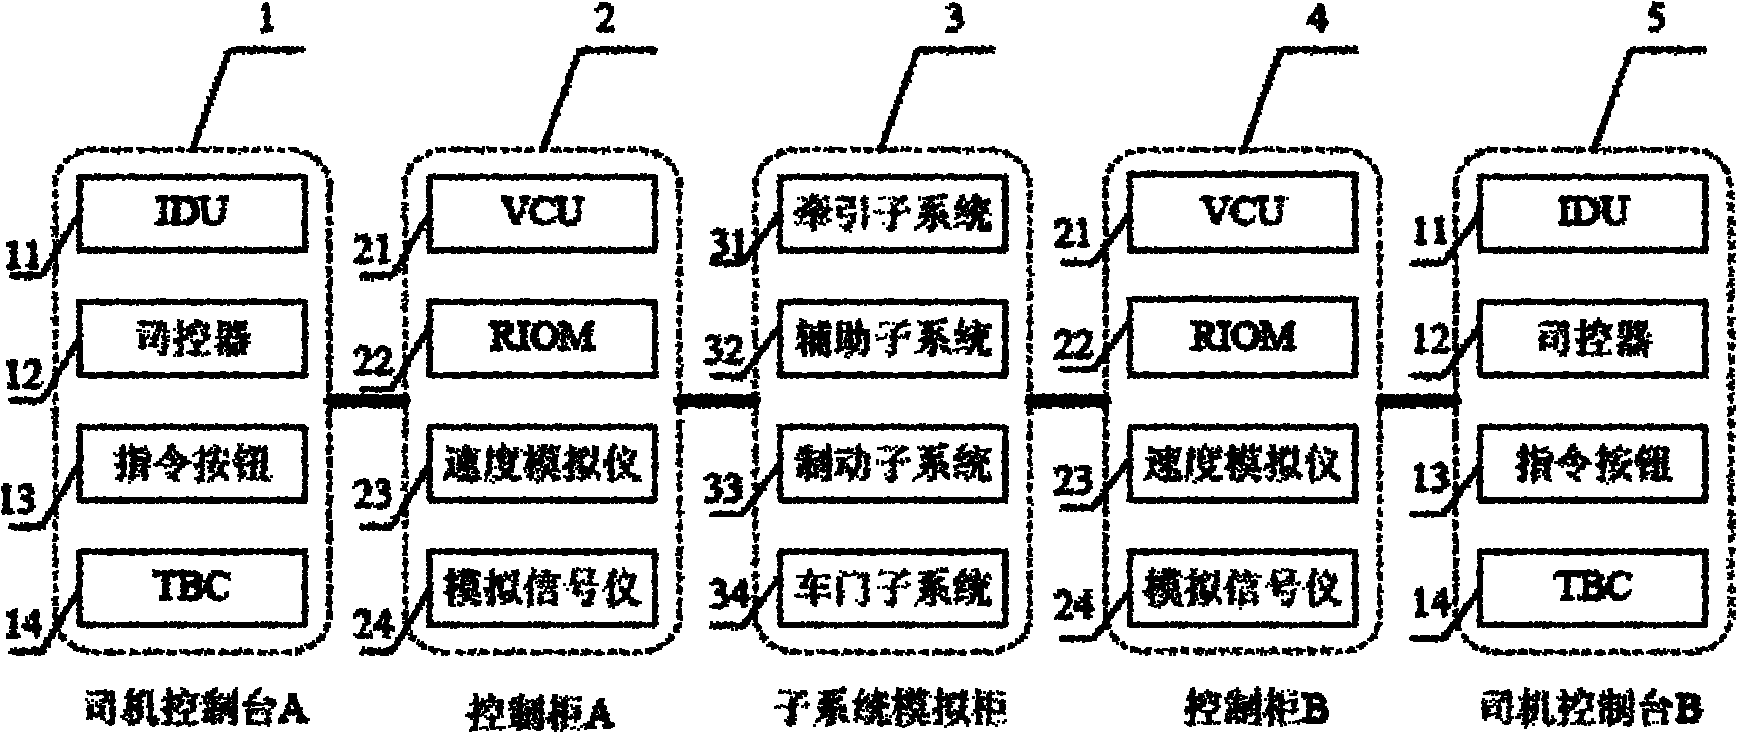 Test platform of controller area network (CAN)-based light rail vehicle network control system